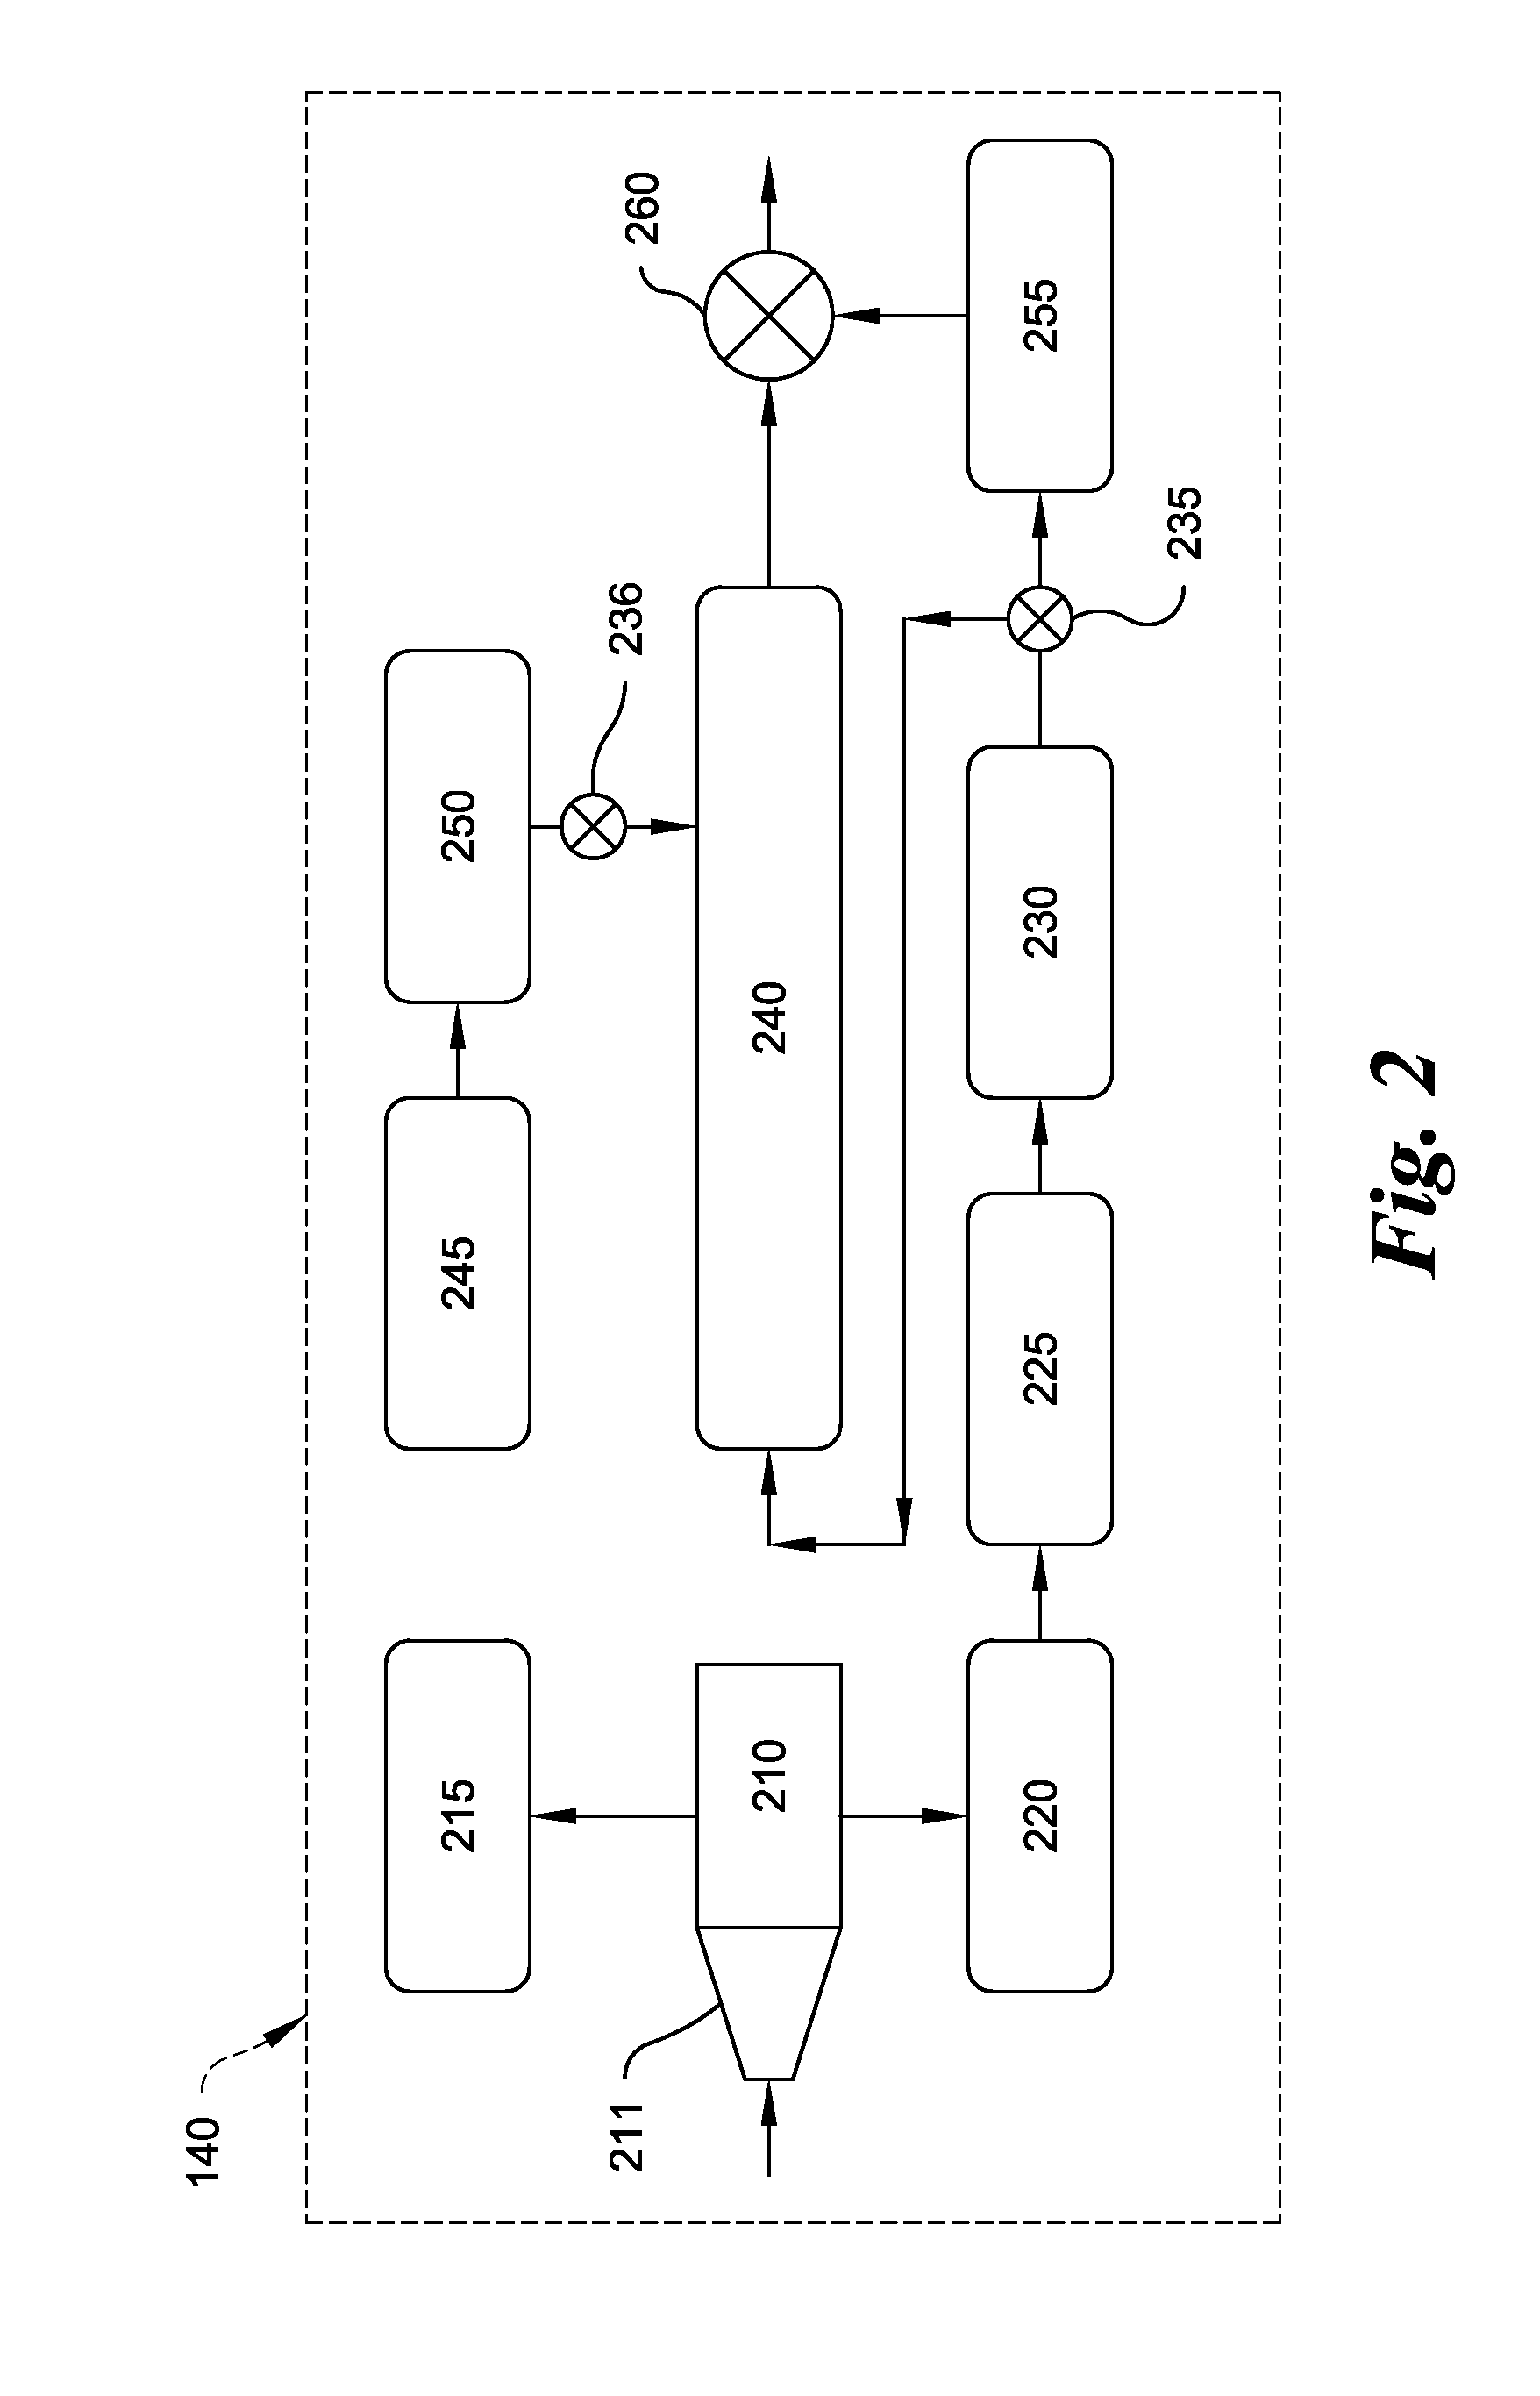 Method and Apparatus for Measuring Trace Levels of CO in Human Breath Using Cavity Enhanced, Mid-Infared Absorption Spectroscopy